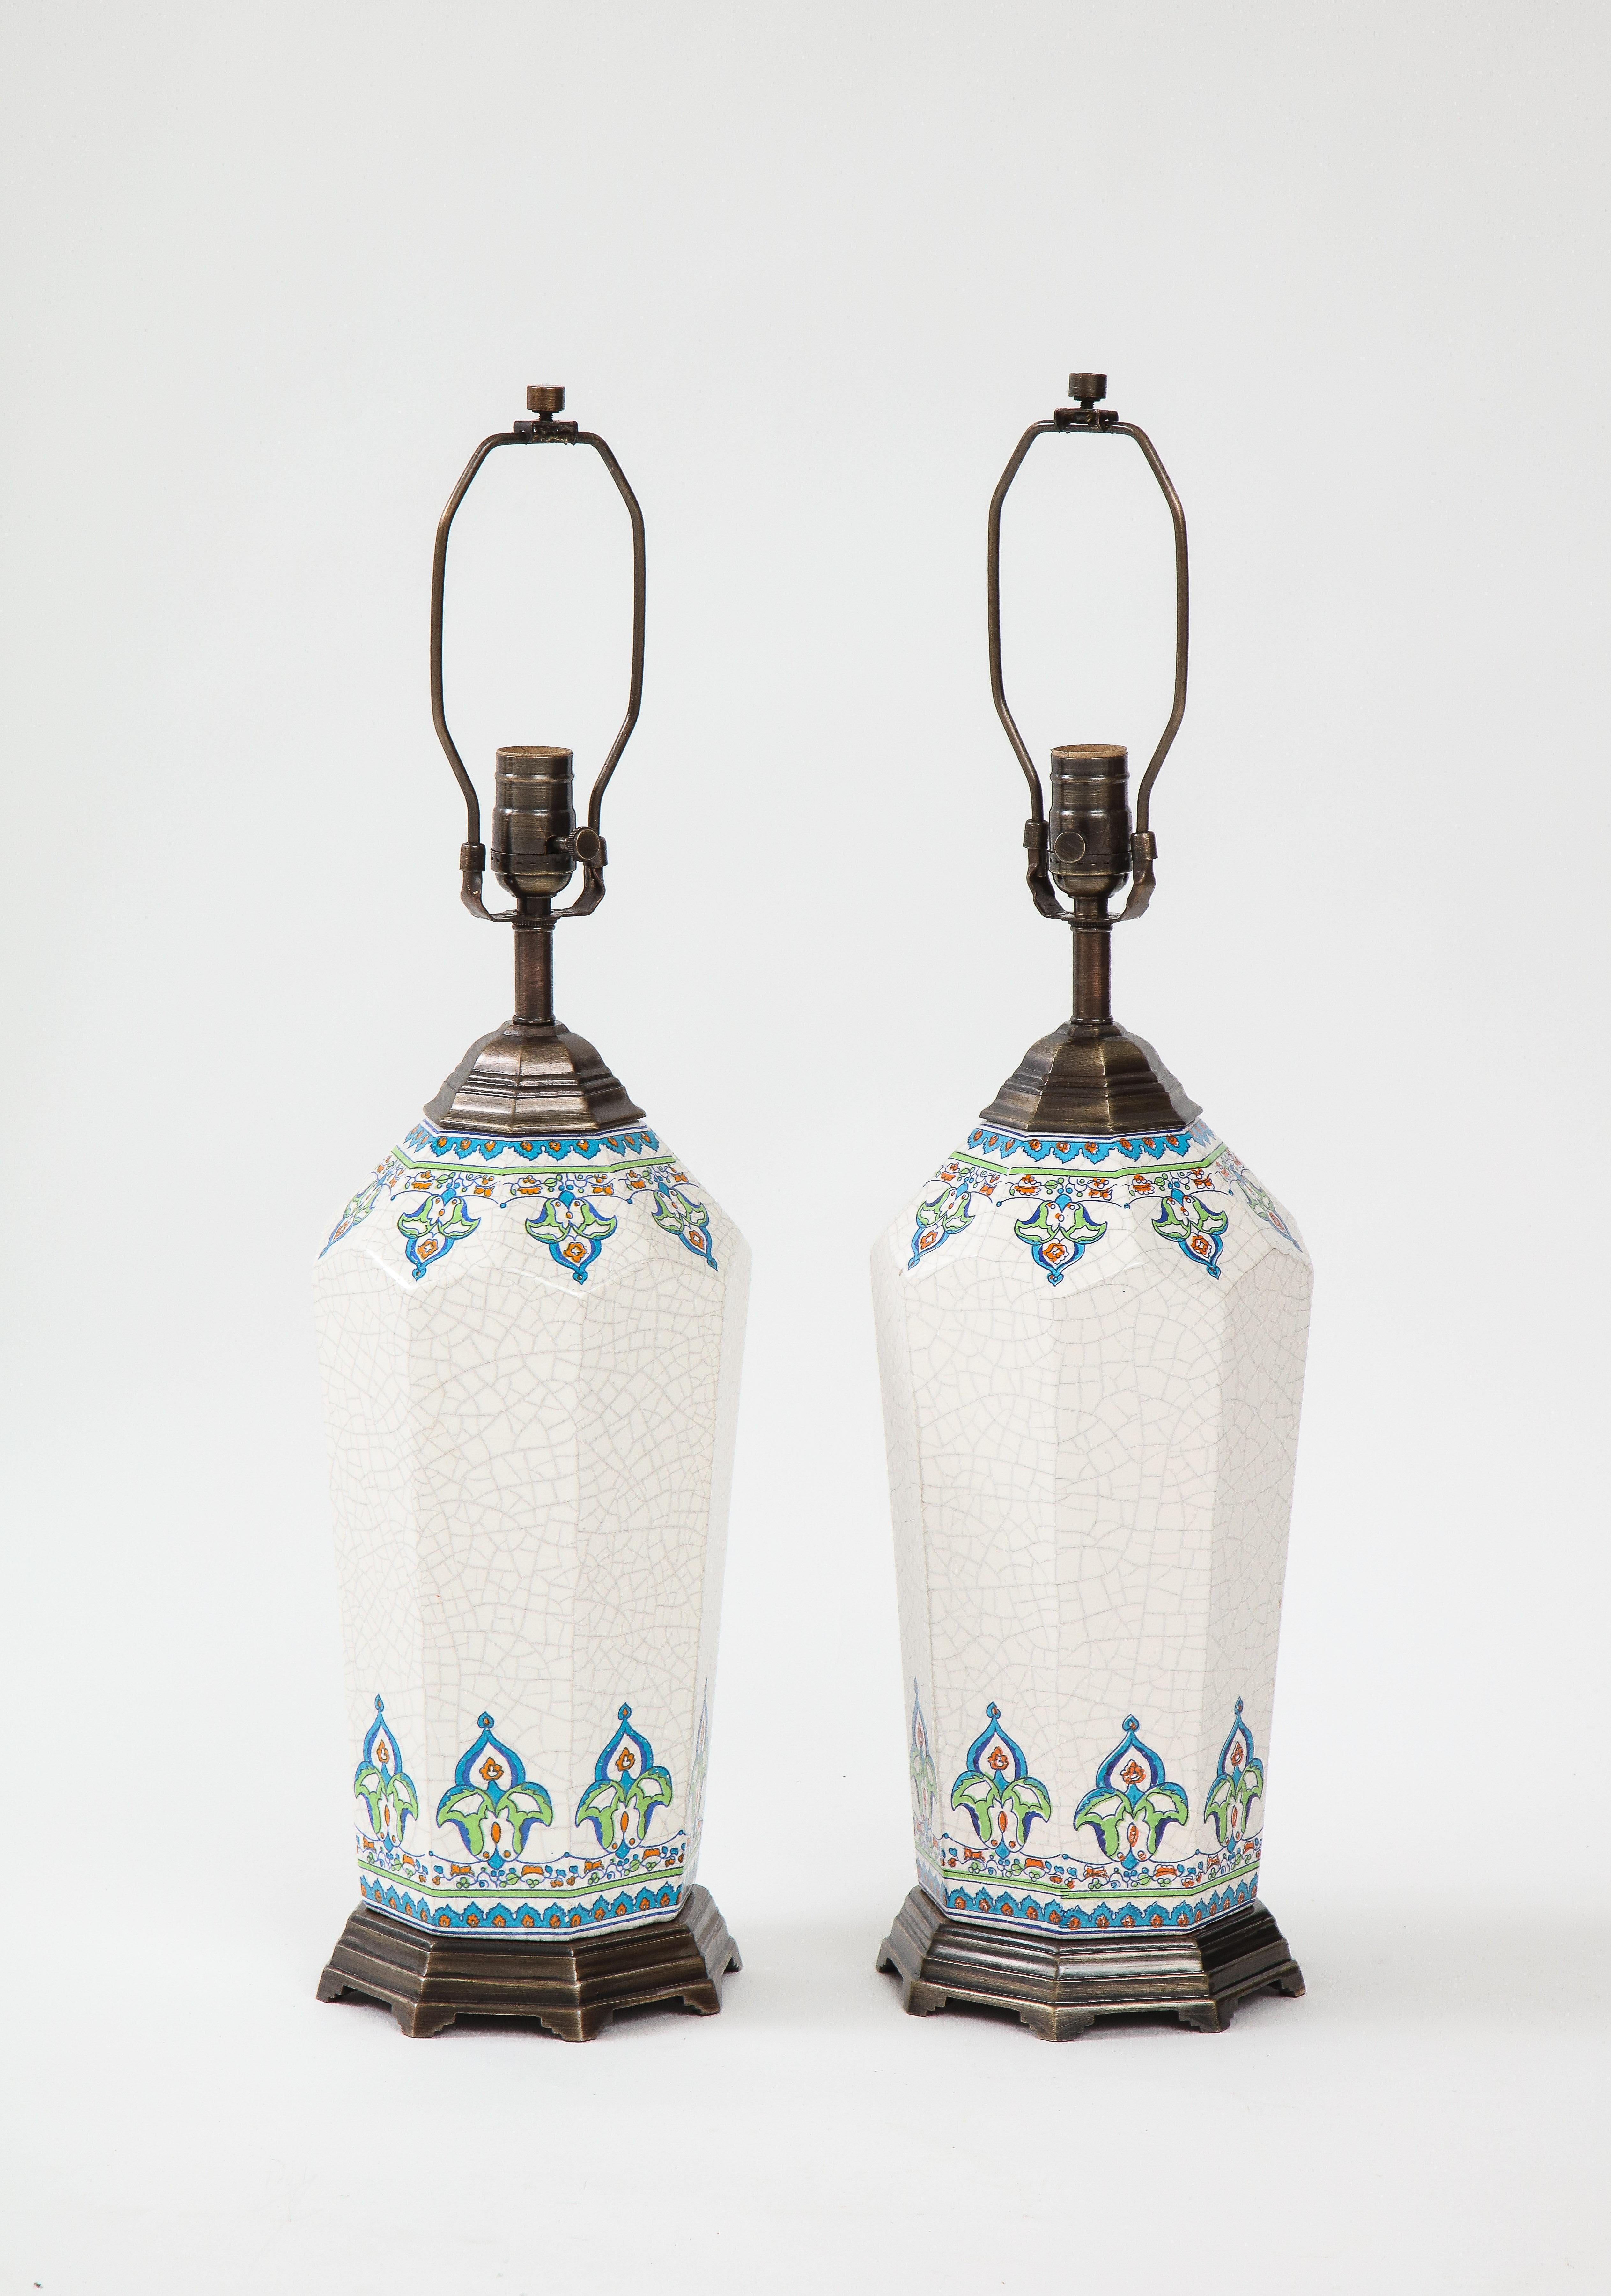 Pair of crackled glaze porcelain lamps featuring an Arts & Crafts transfer border. Lamps have bronze bases and hardware throughout. Rewired for use in the USA, 100W max.